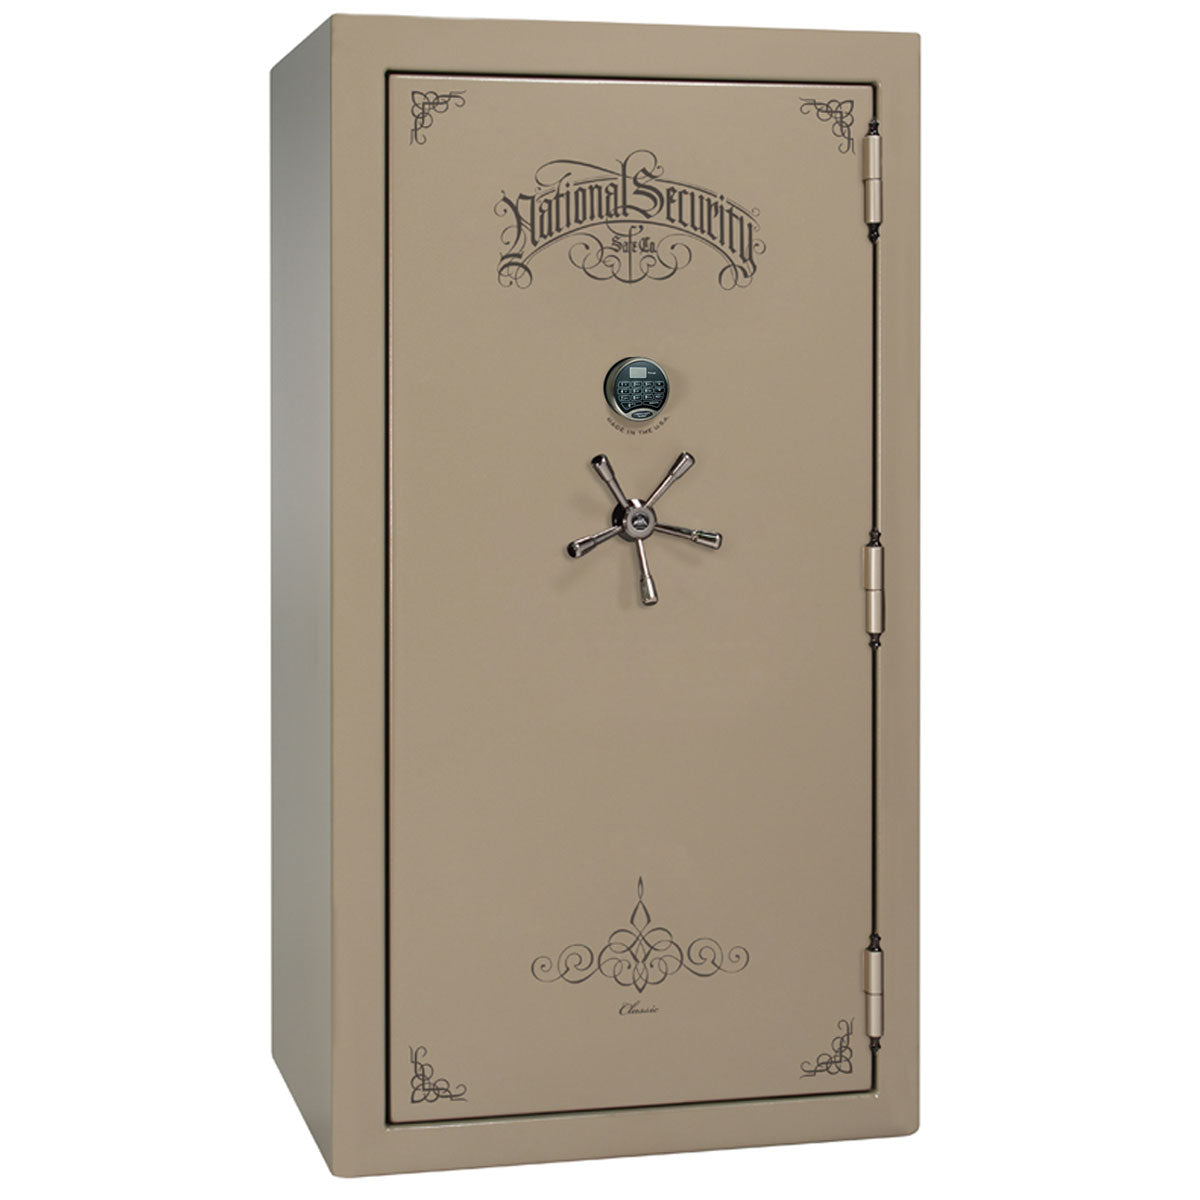 Liberty Safe Classic Plus 40 in Champagne Marble with Black Chrome Electronic Lock, closed door.